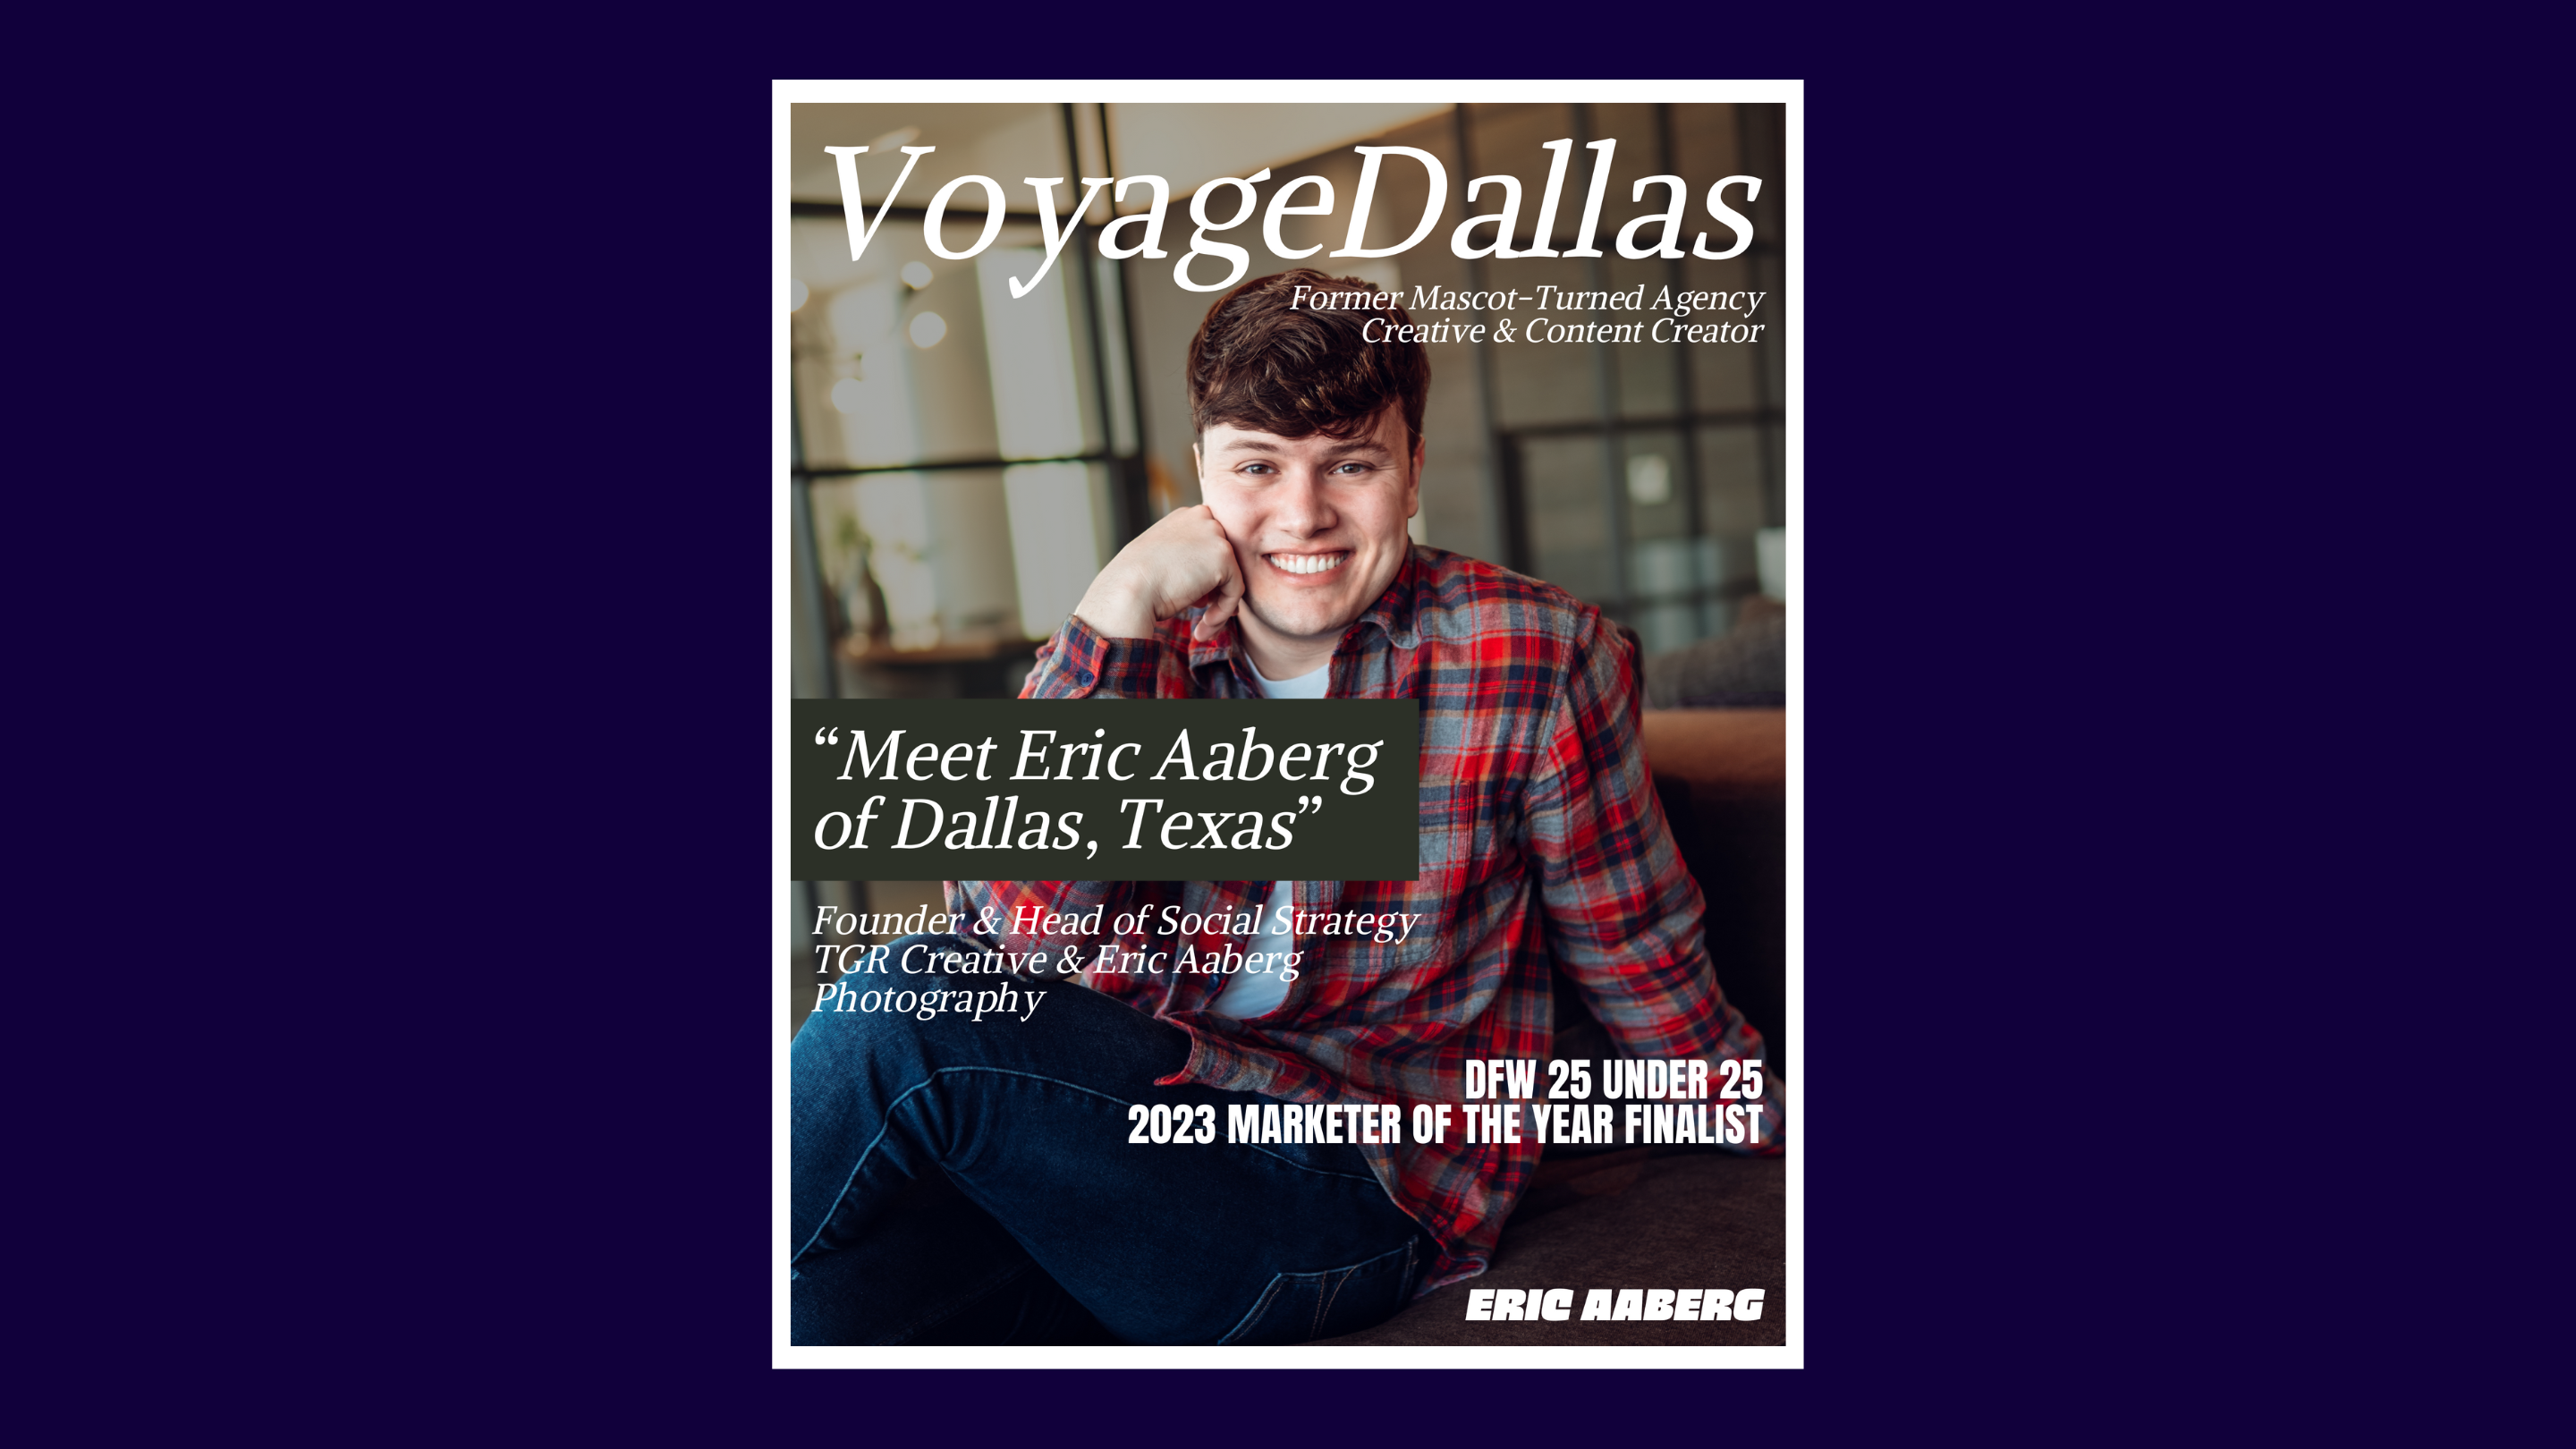 Dallas Agency Owner, Eric Aaberg, Featured for Creative Vision